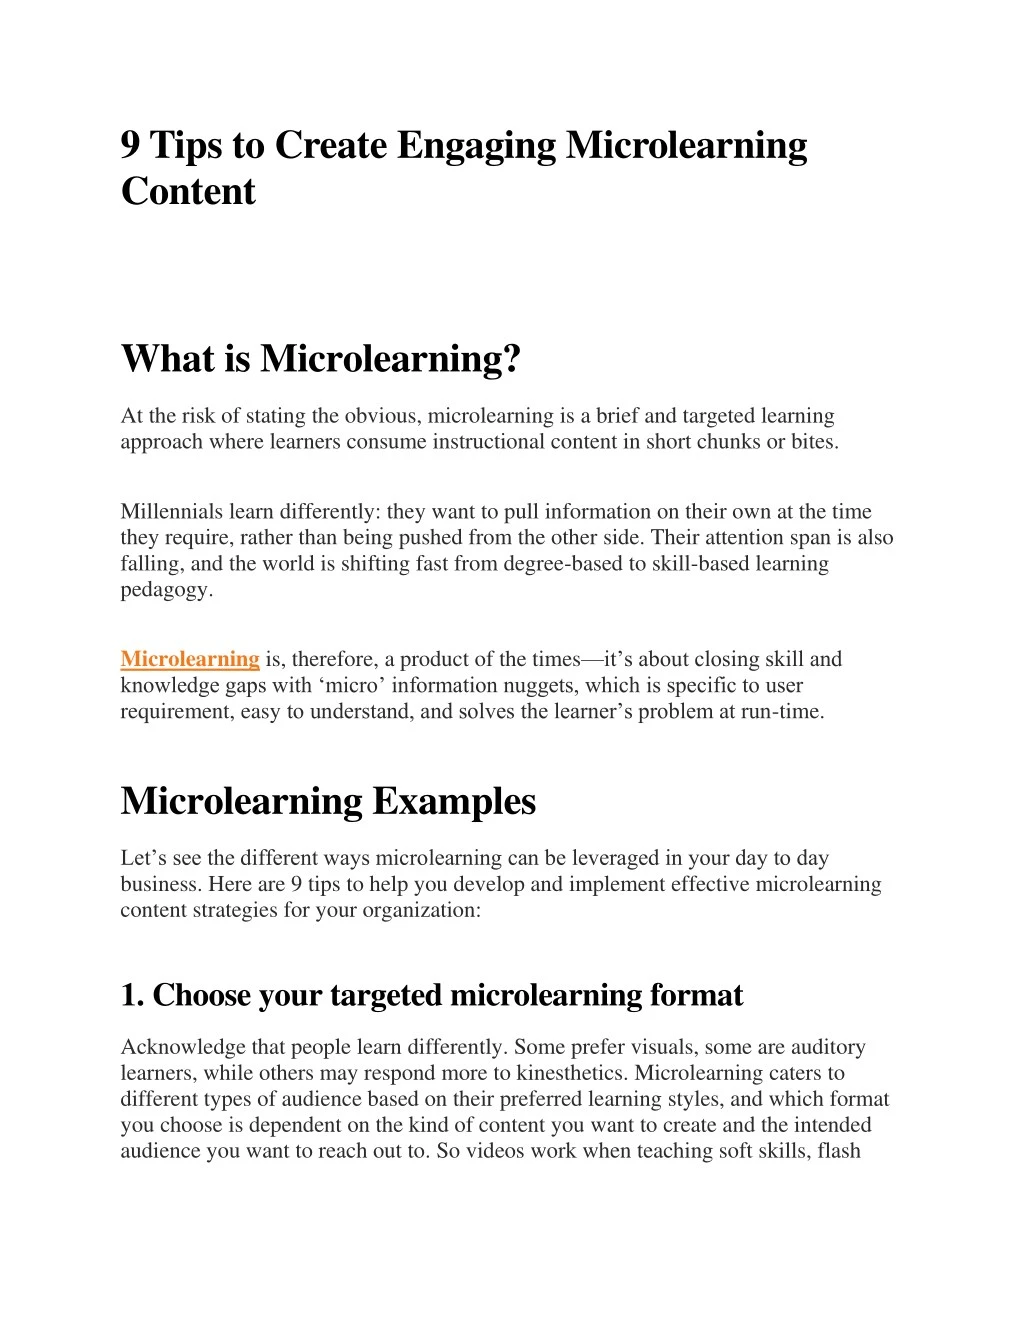 9 tips to create engaging microlearning content